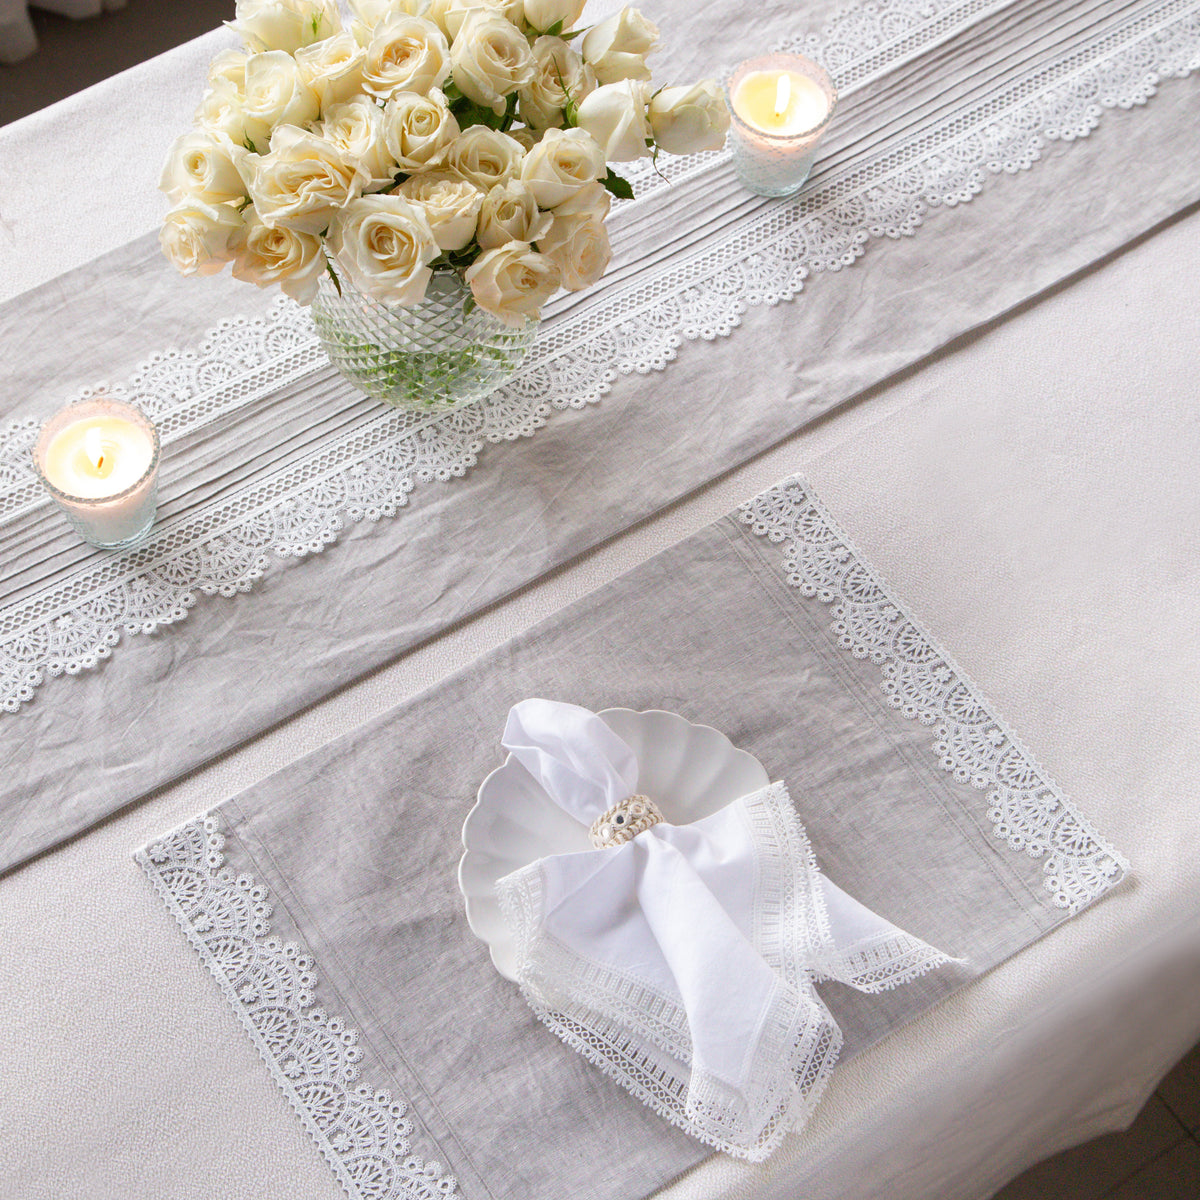 Grey With White Lace Table Linen Set